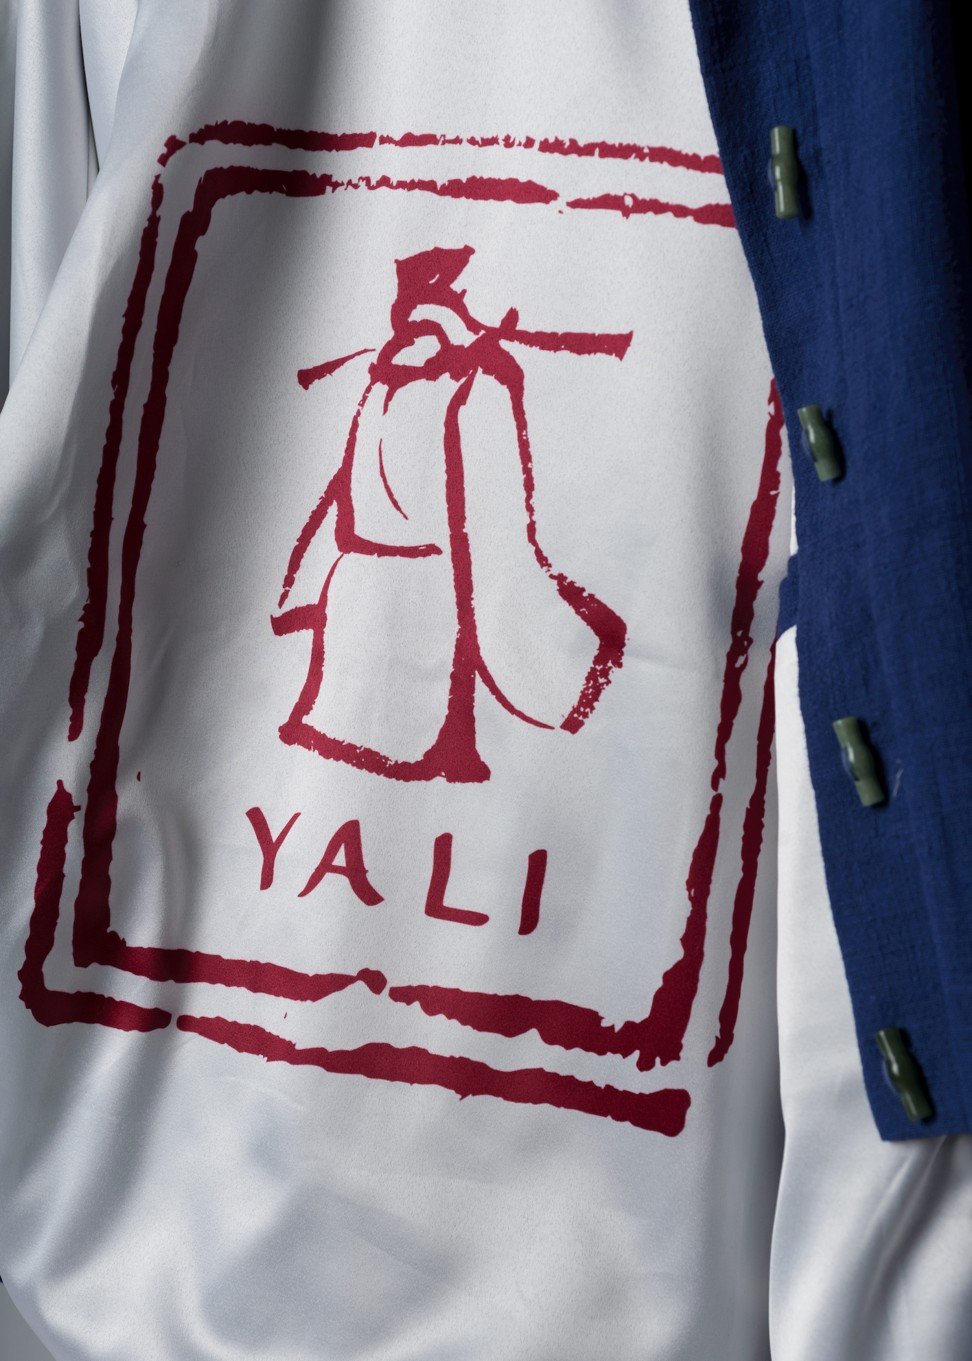 Lining detail from a Yali jacket showing the brand’s logo.